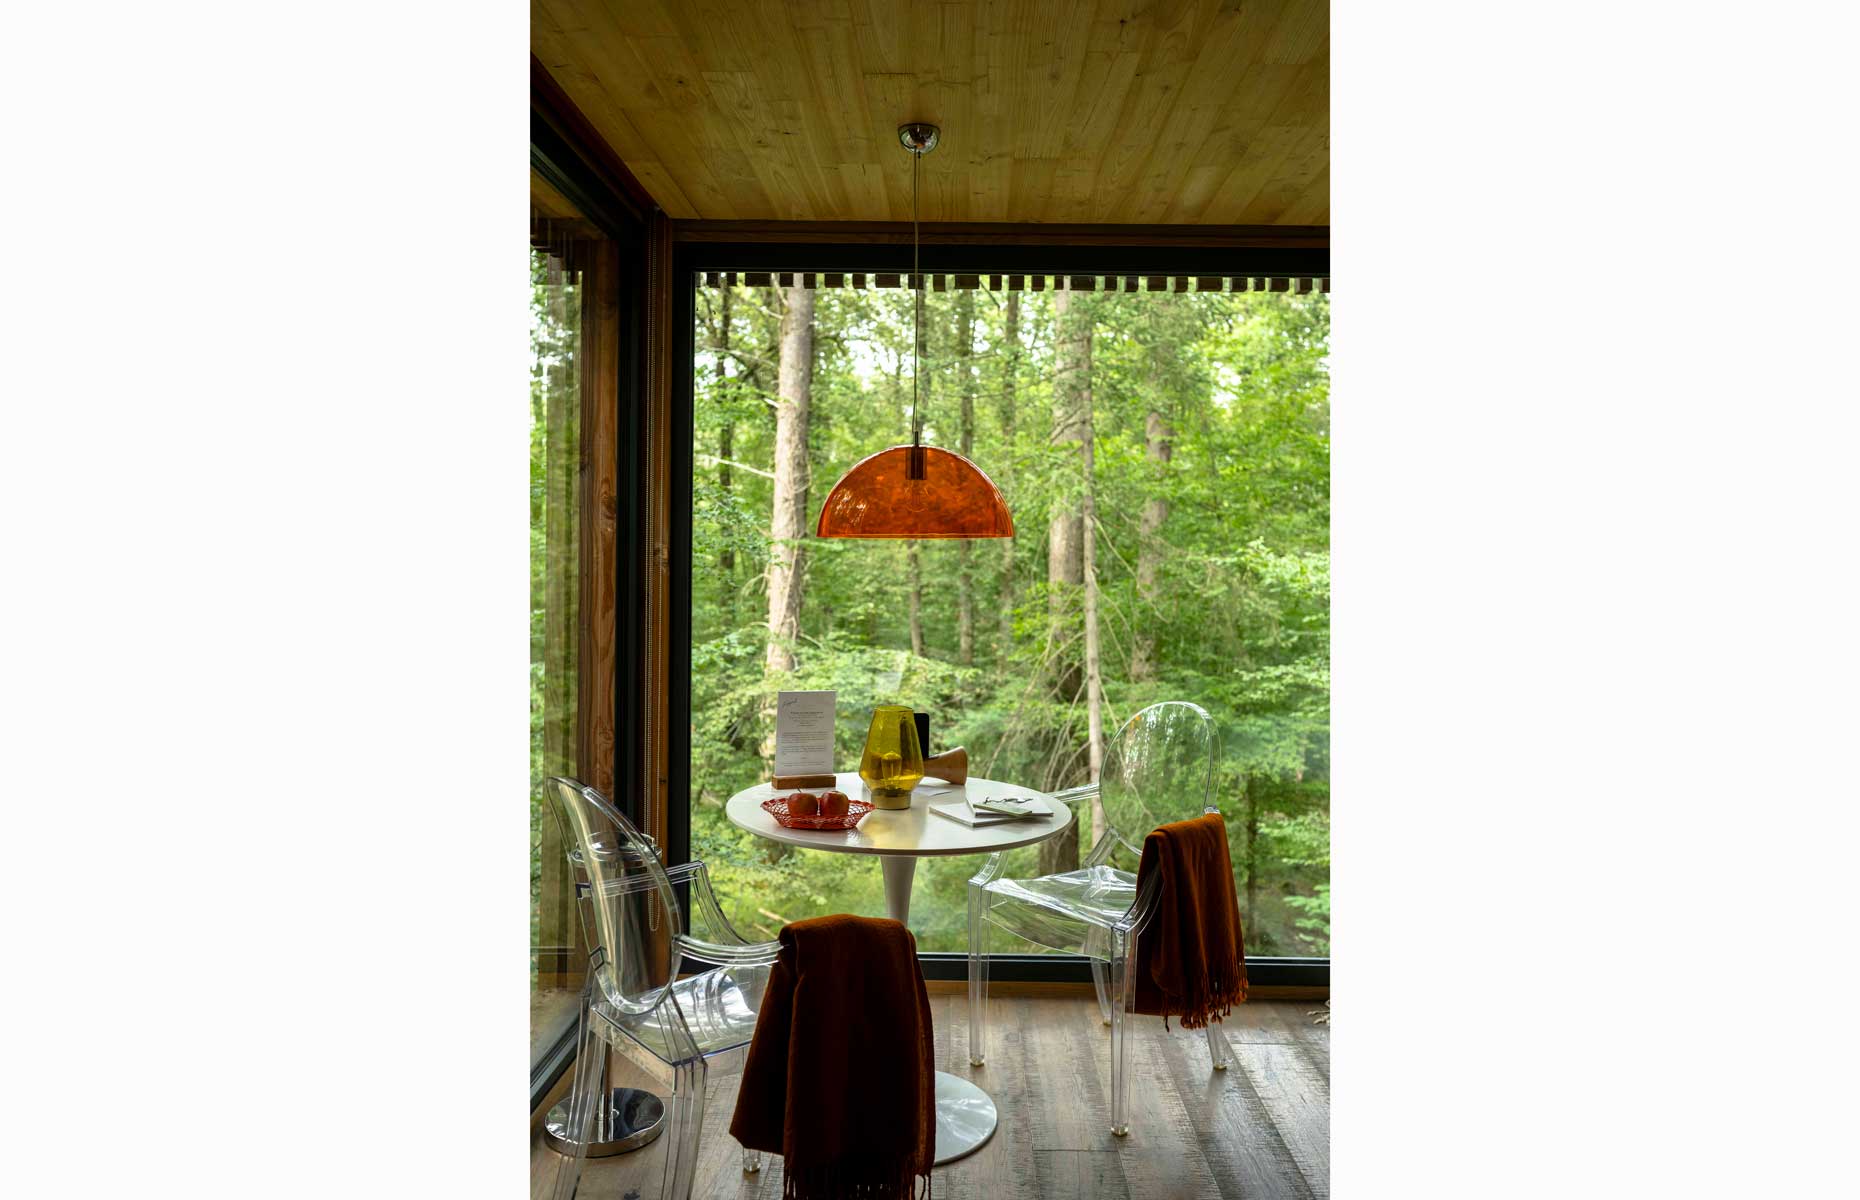 Forest views from Sixties lodge at Loire Valley Lodges: Image (Geraldine Martens)